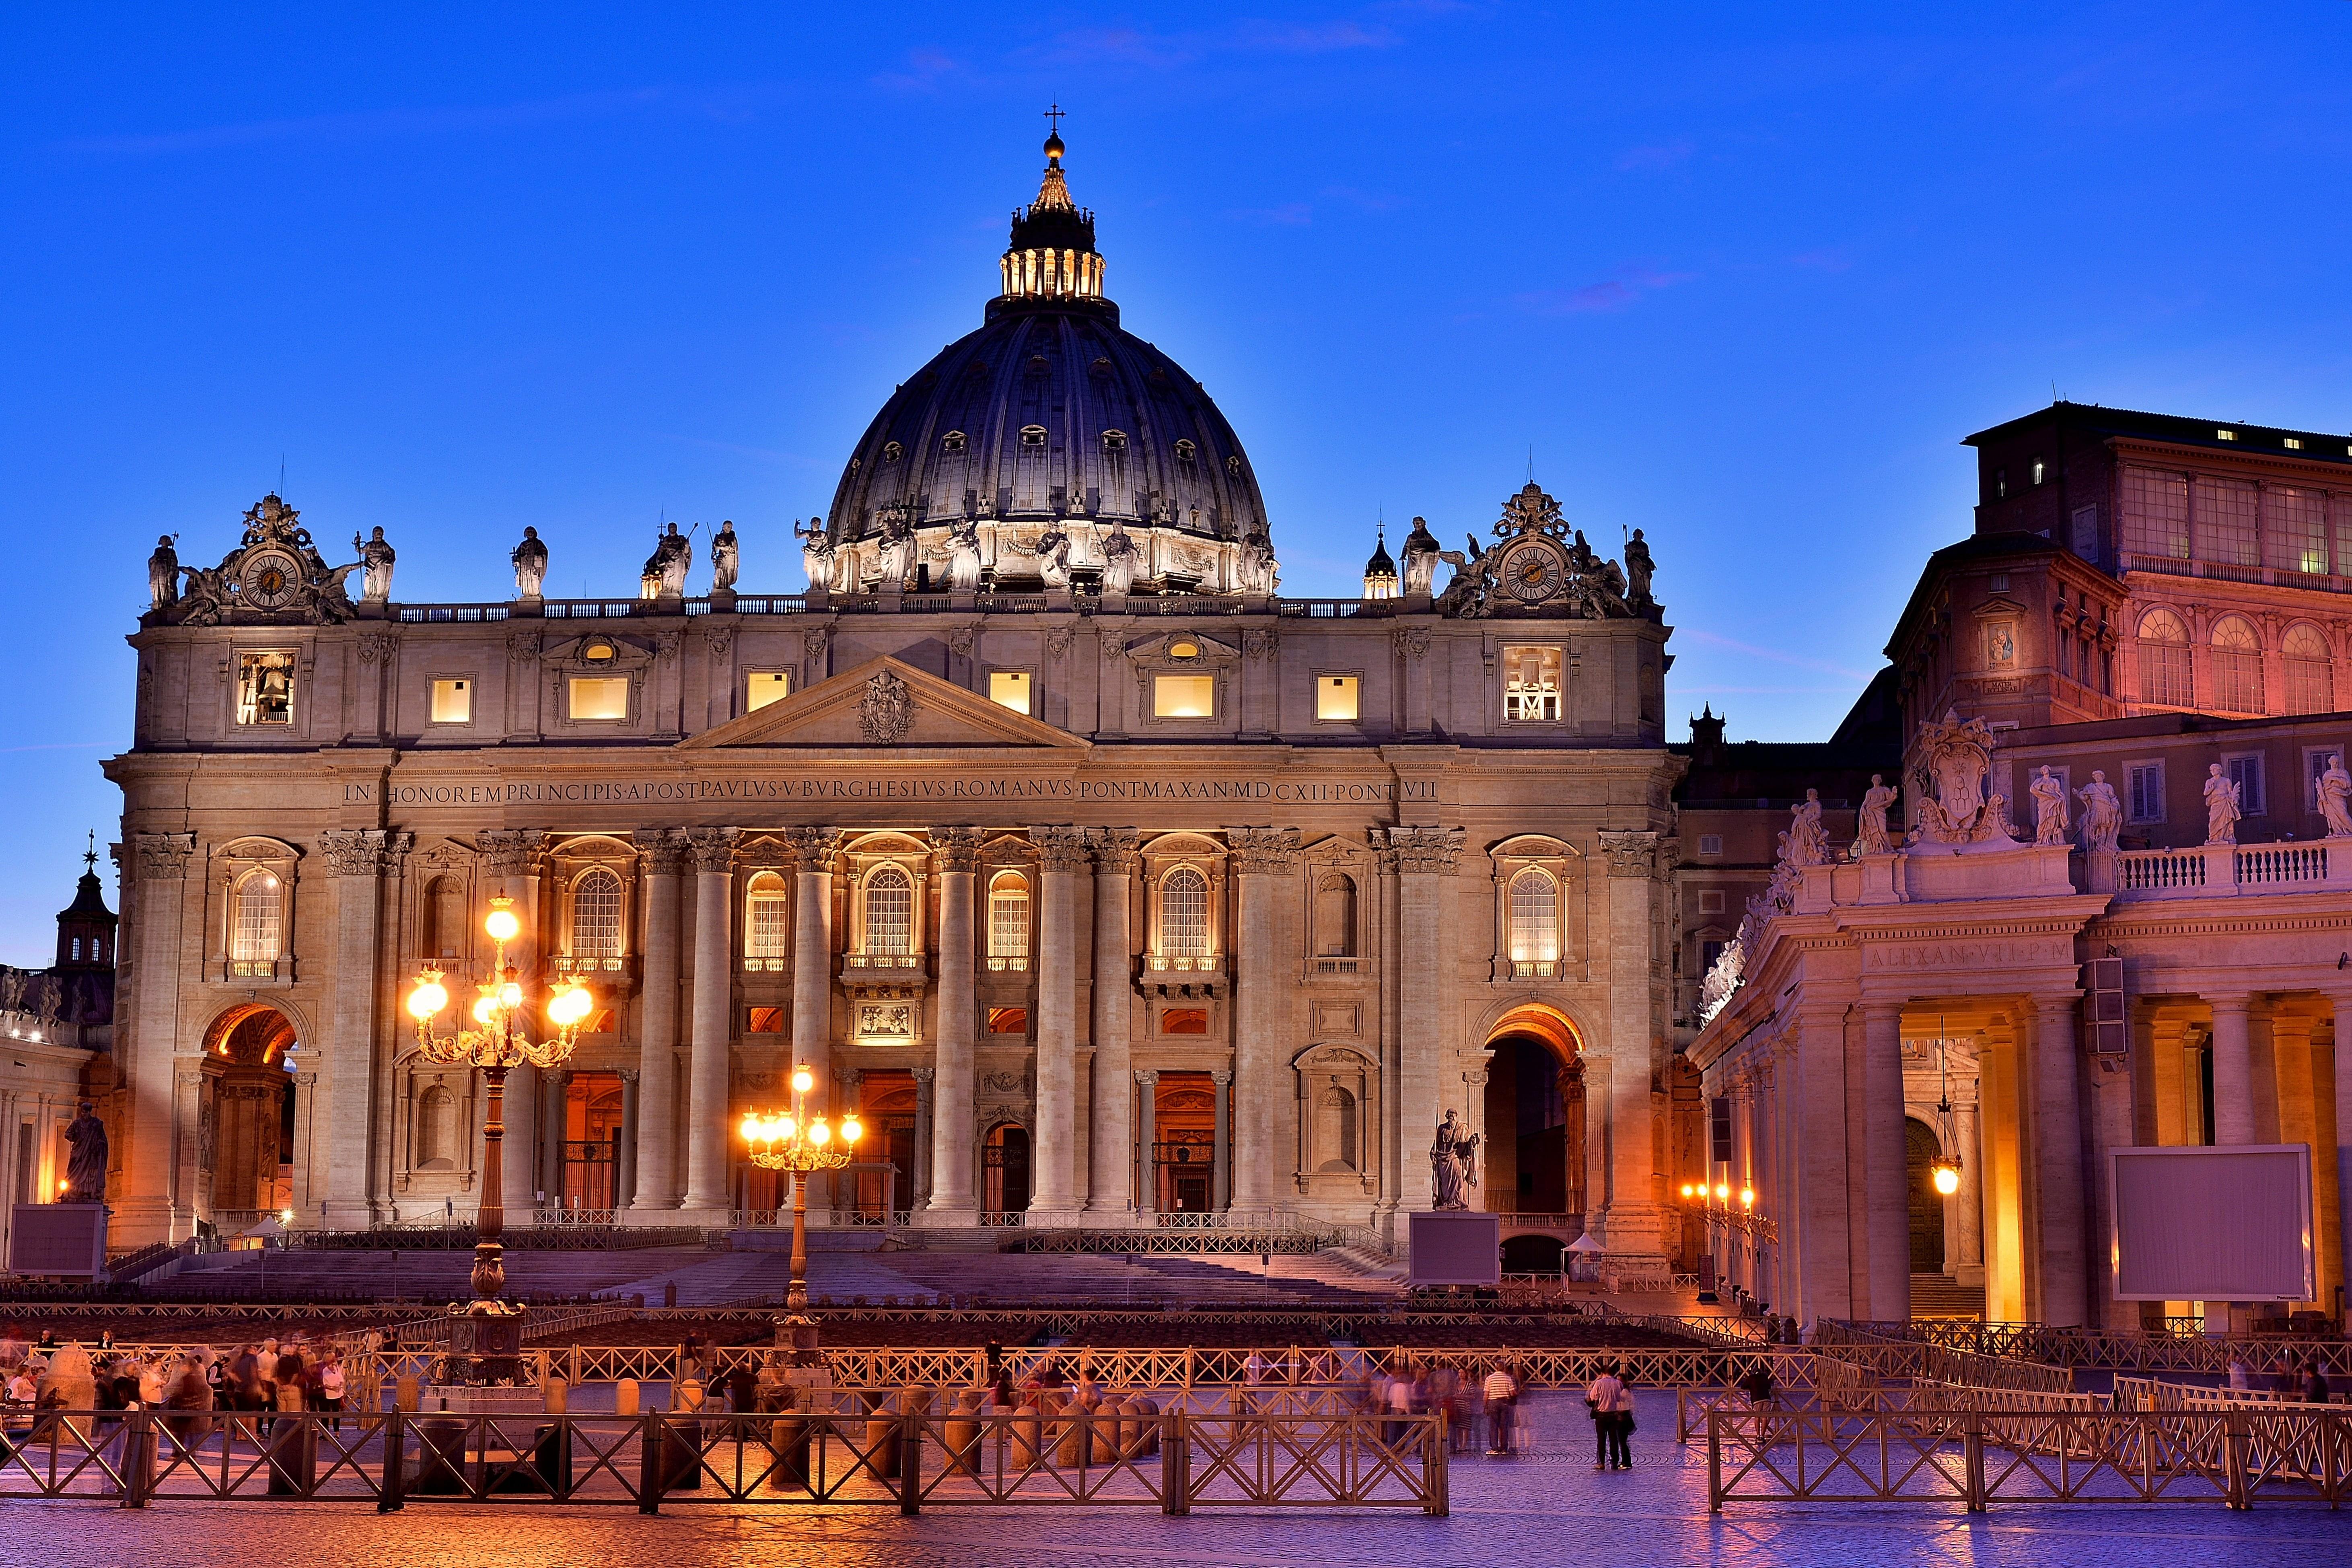 Night view of St. Peter's Basilica